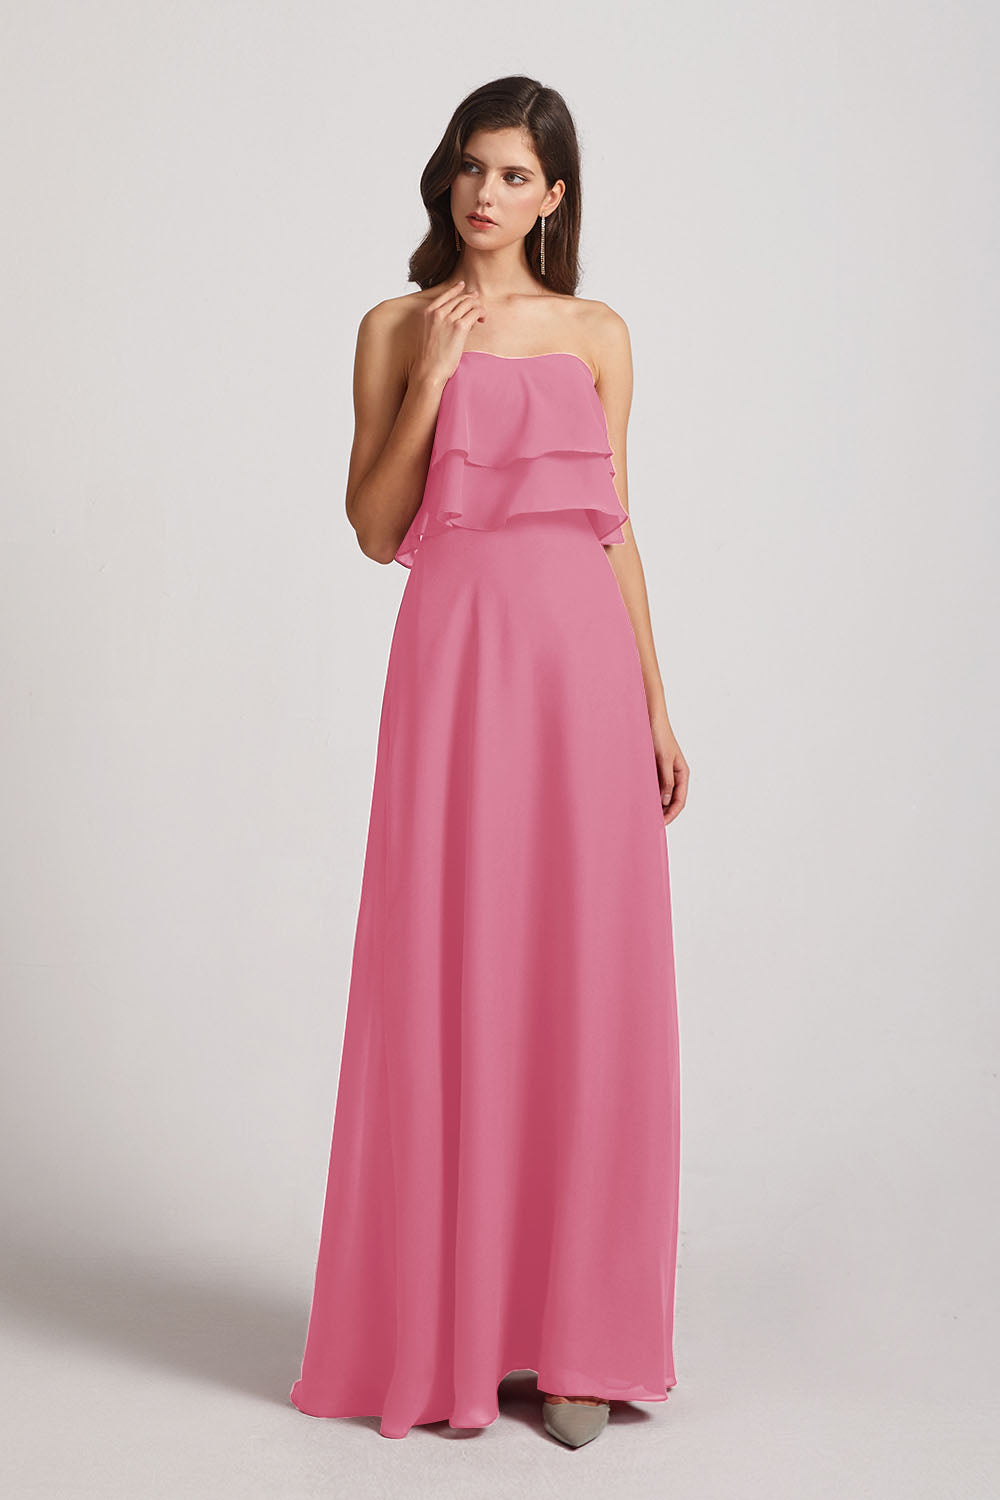 Alfa Bridal Skin Pink Strapless Chiffon Bridesmaid Dresses with Tiered Ruffles (AF0086)